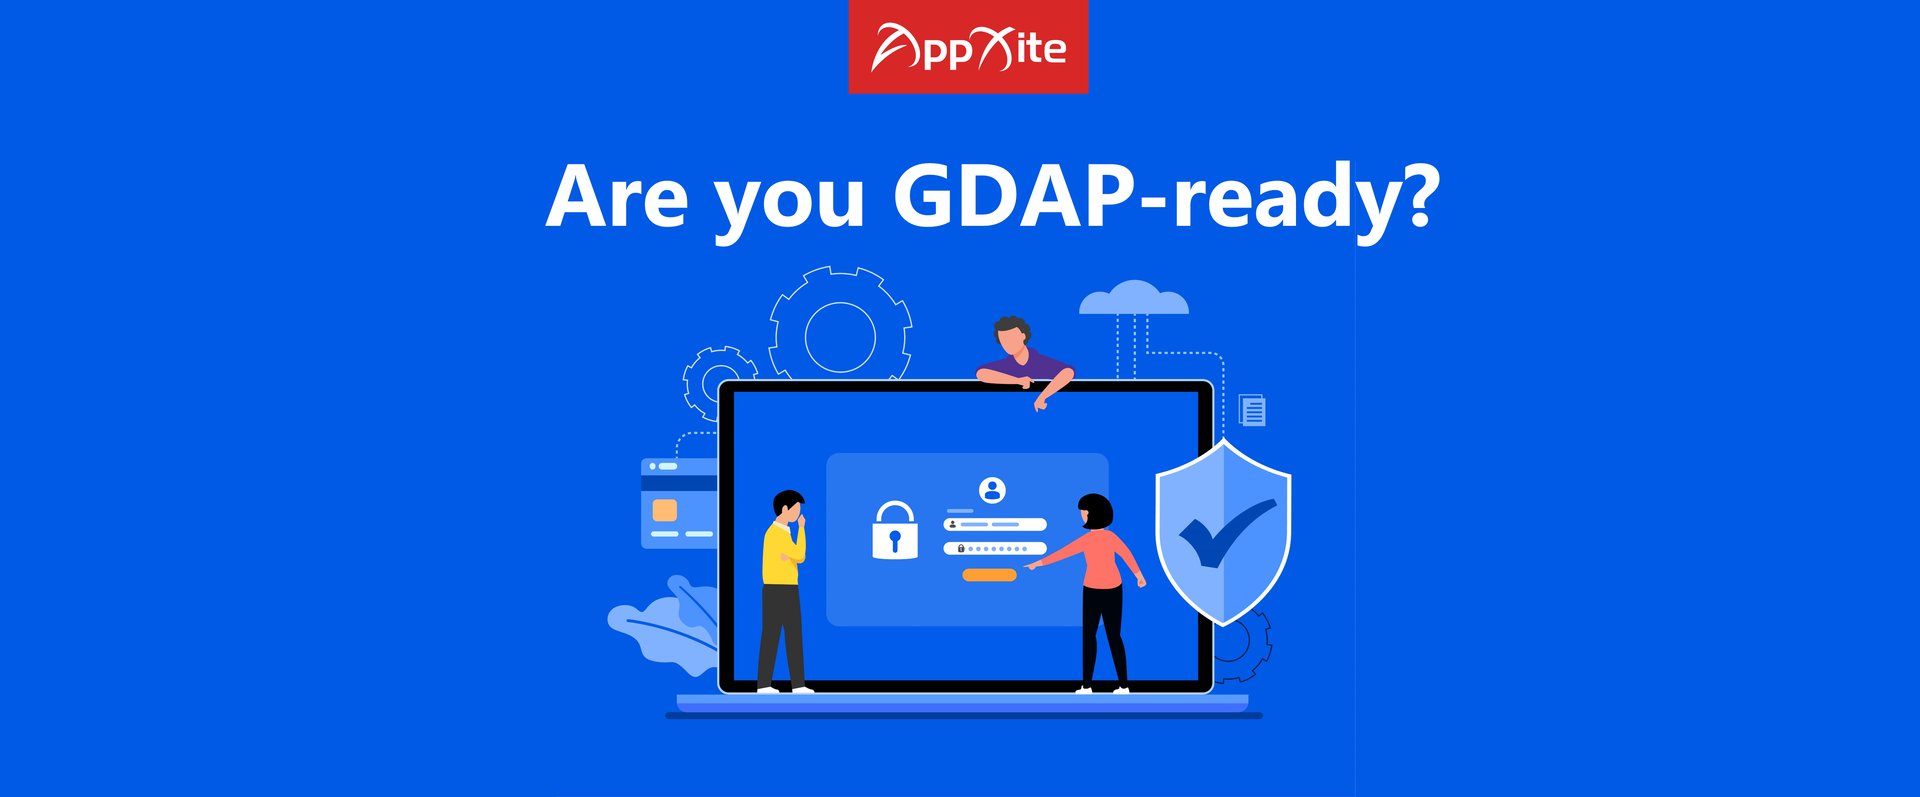 Are you GDAP-ready? All about Microsoft DAP-to-GDAP transition